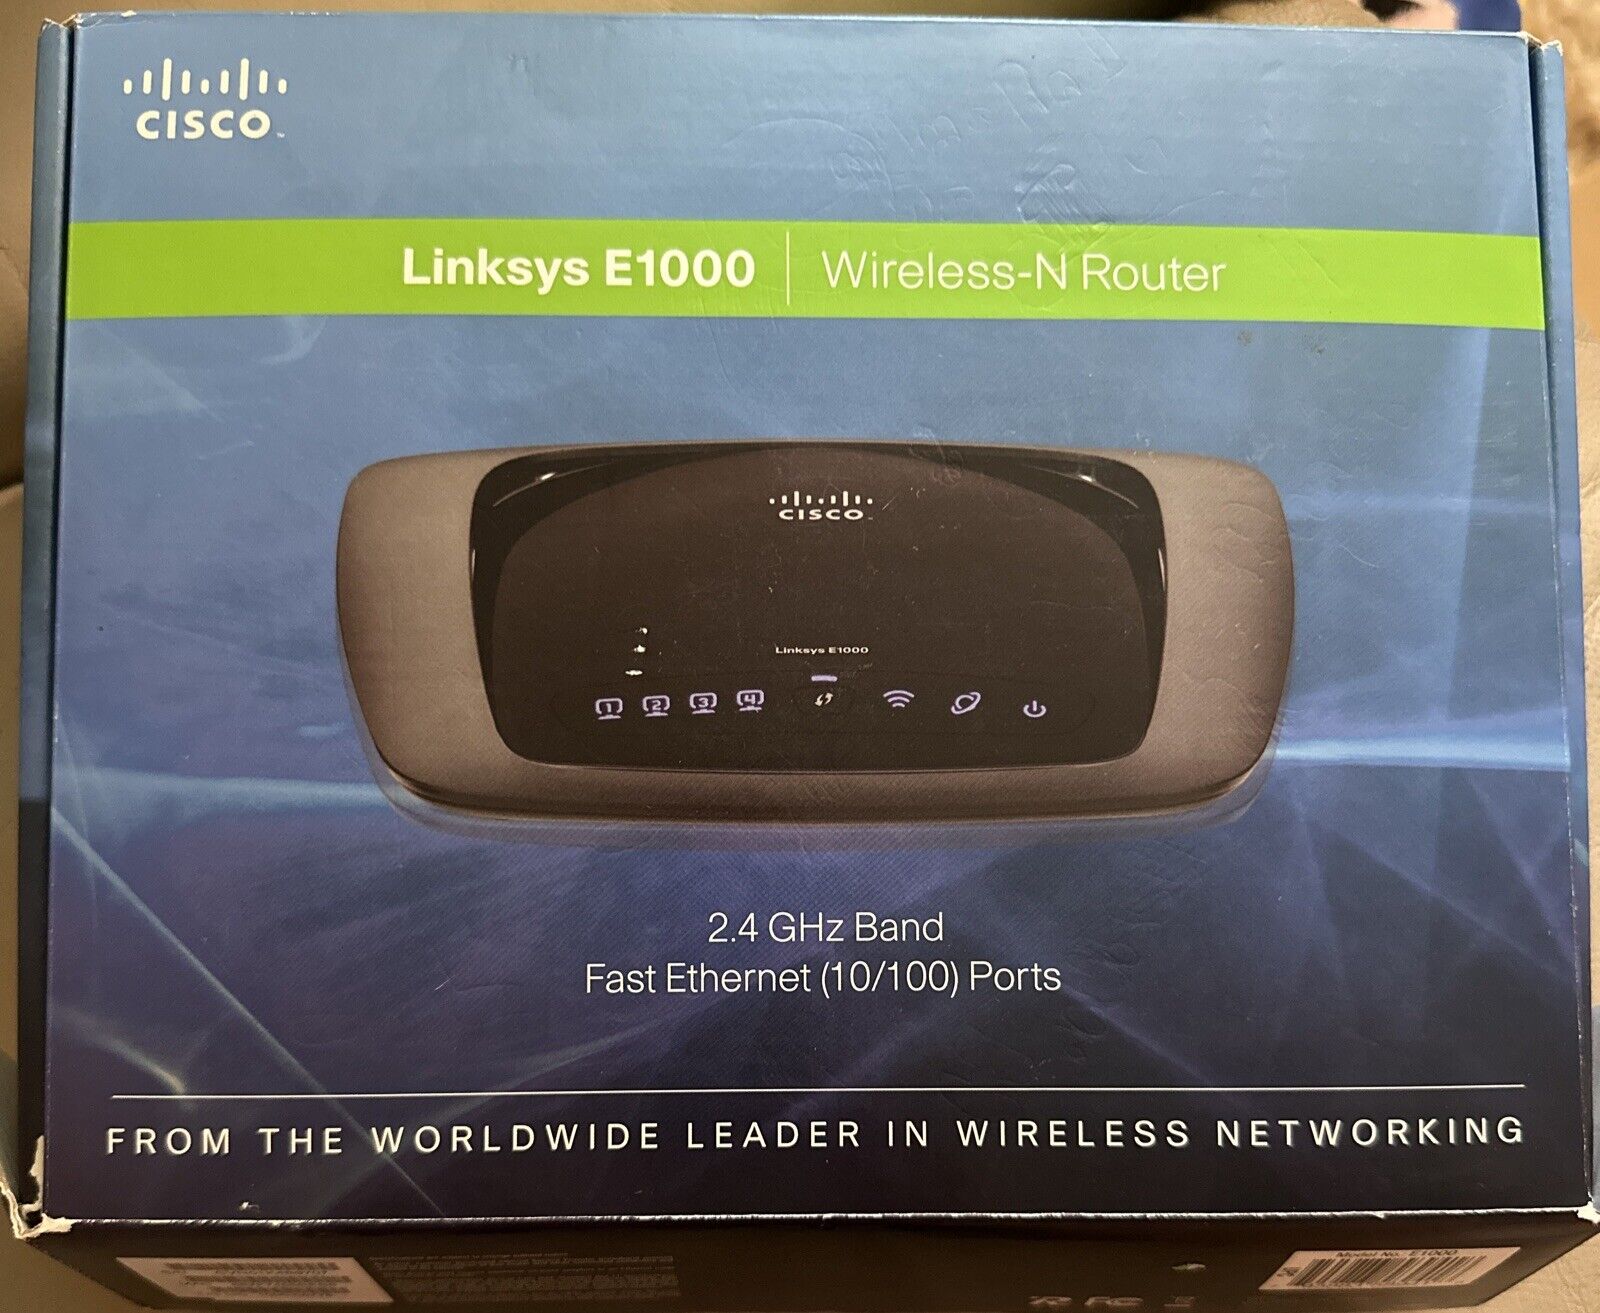 CISCO Linksys E1000 Wireless-N Router 300 Mbps 4-Port 10/100